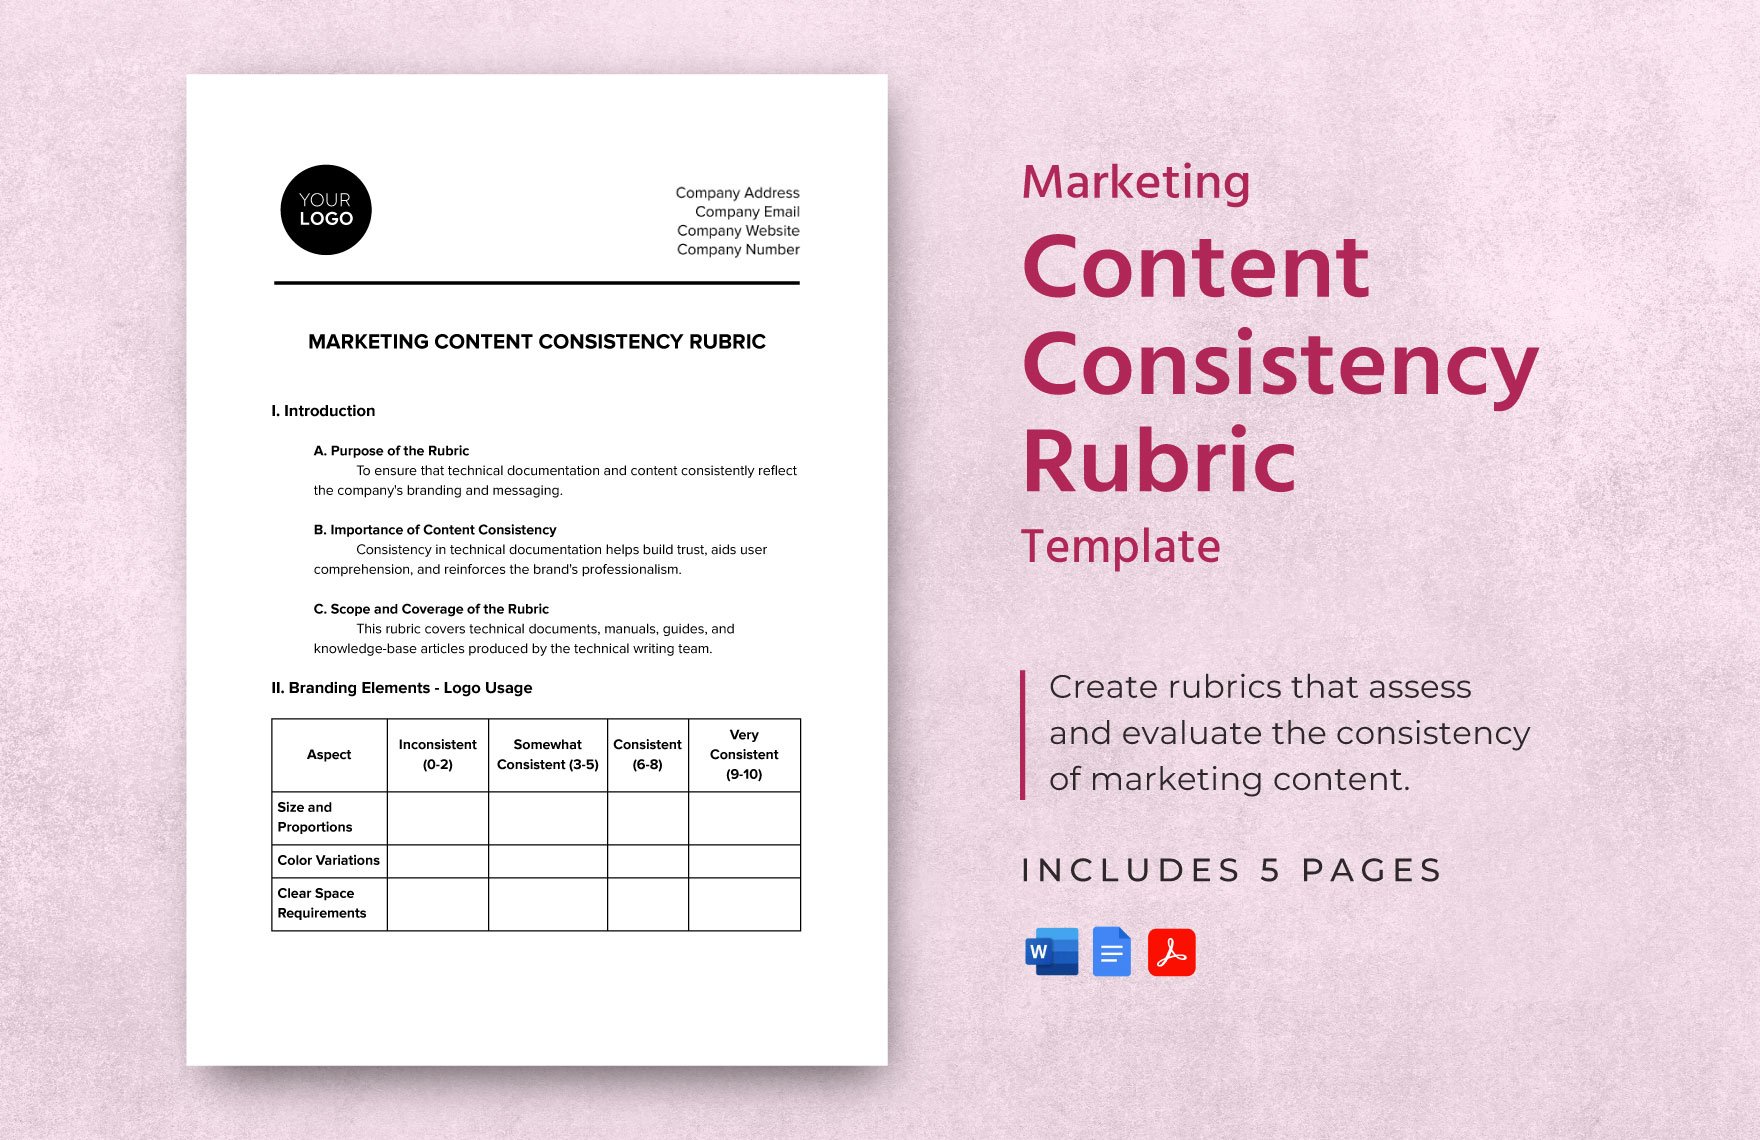 Marketing Content Consistency Rubric Template